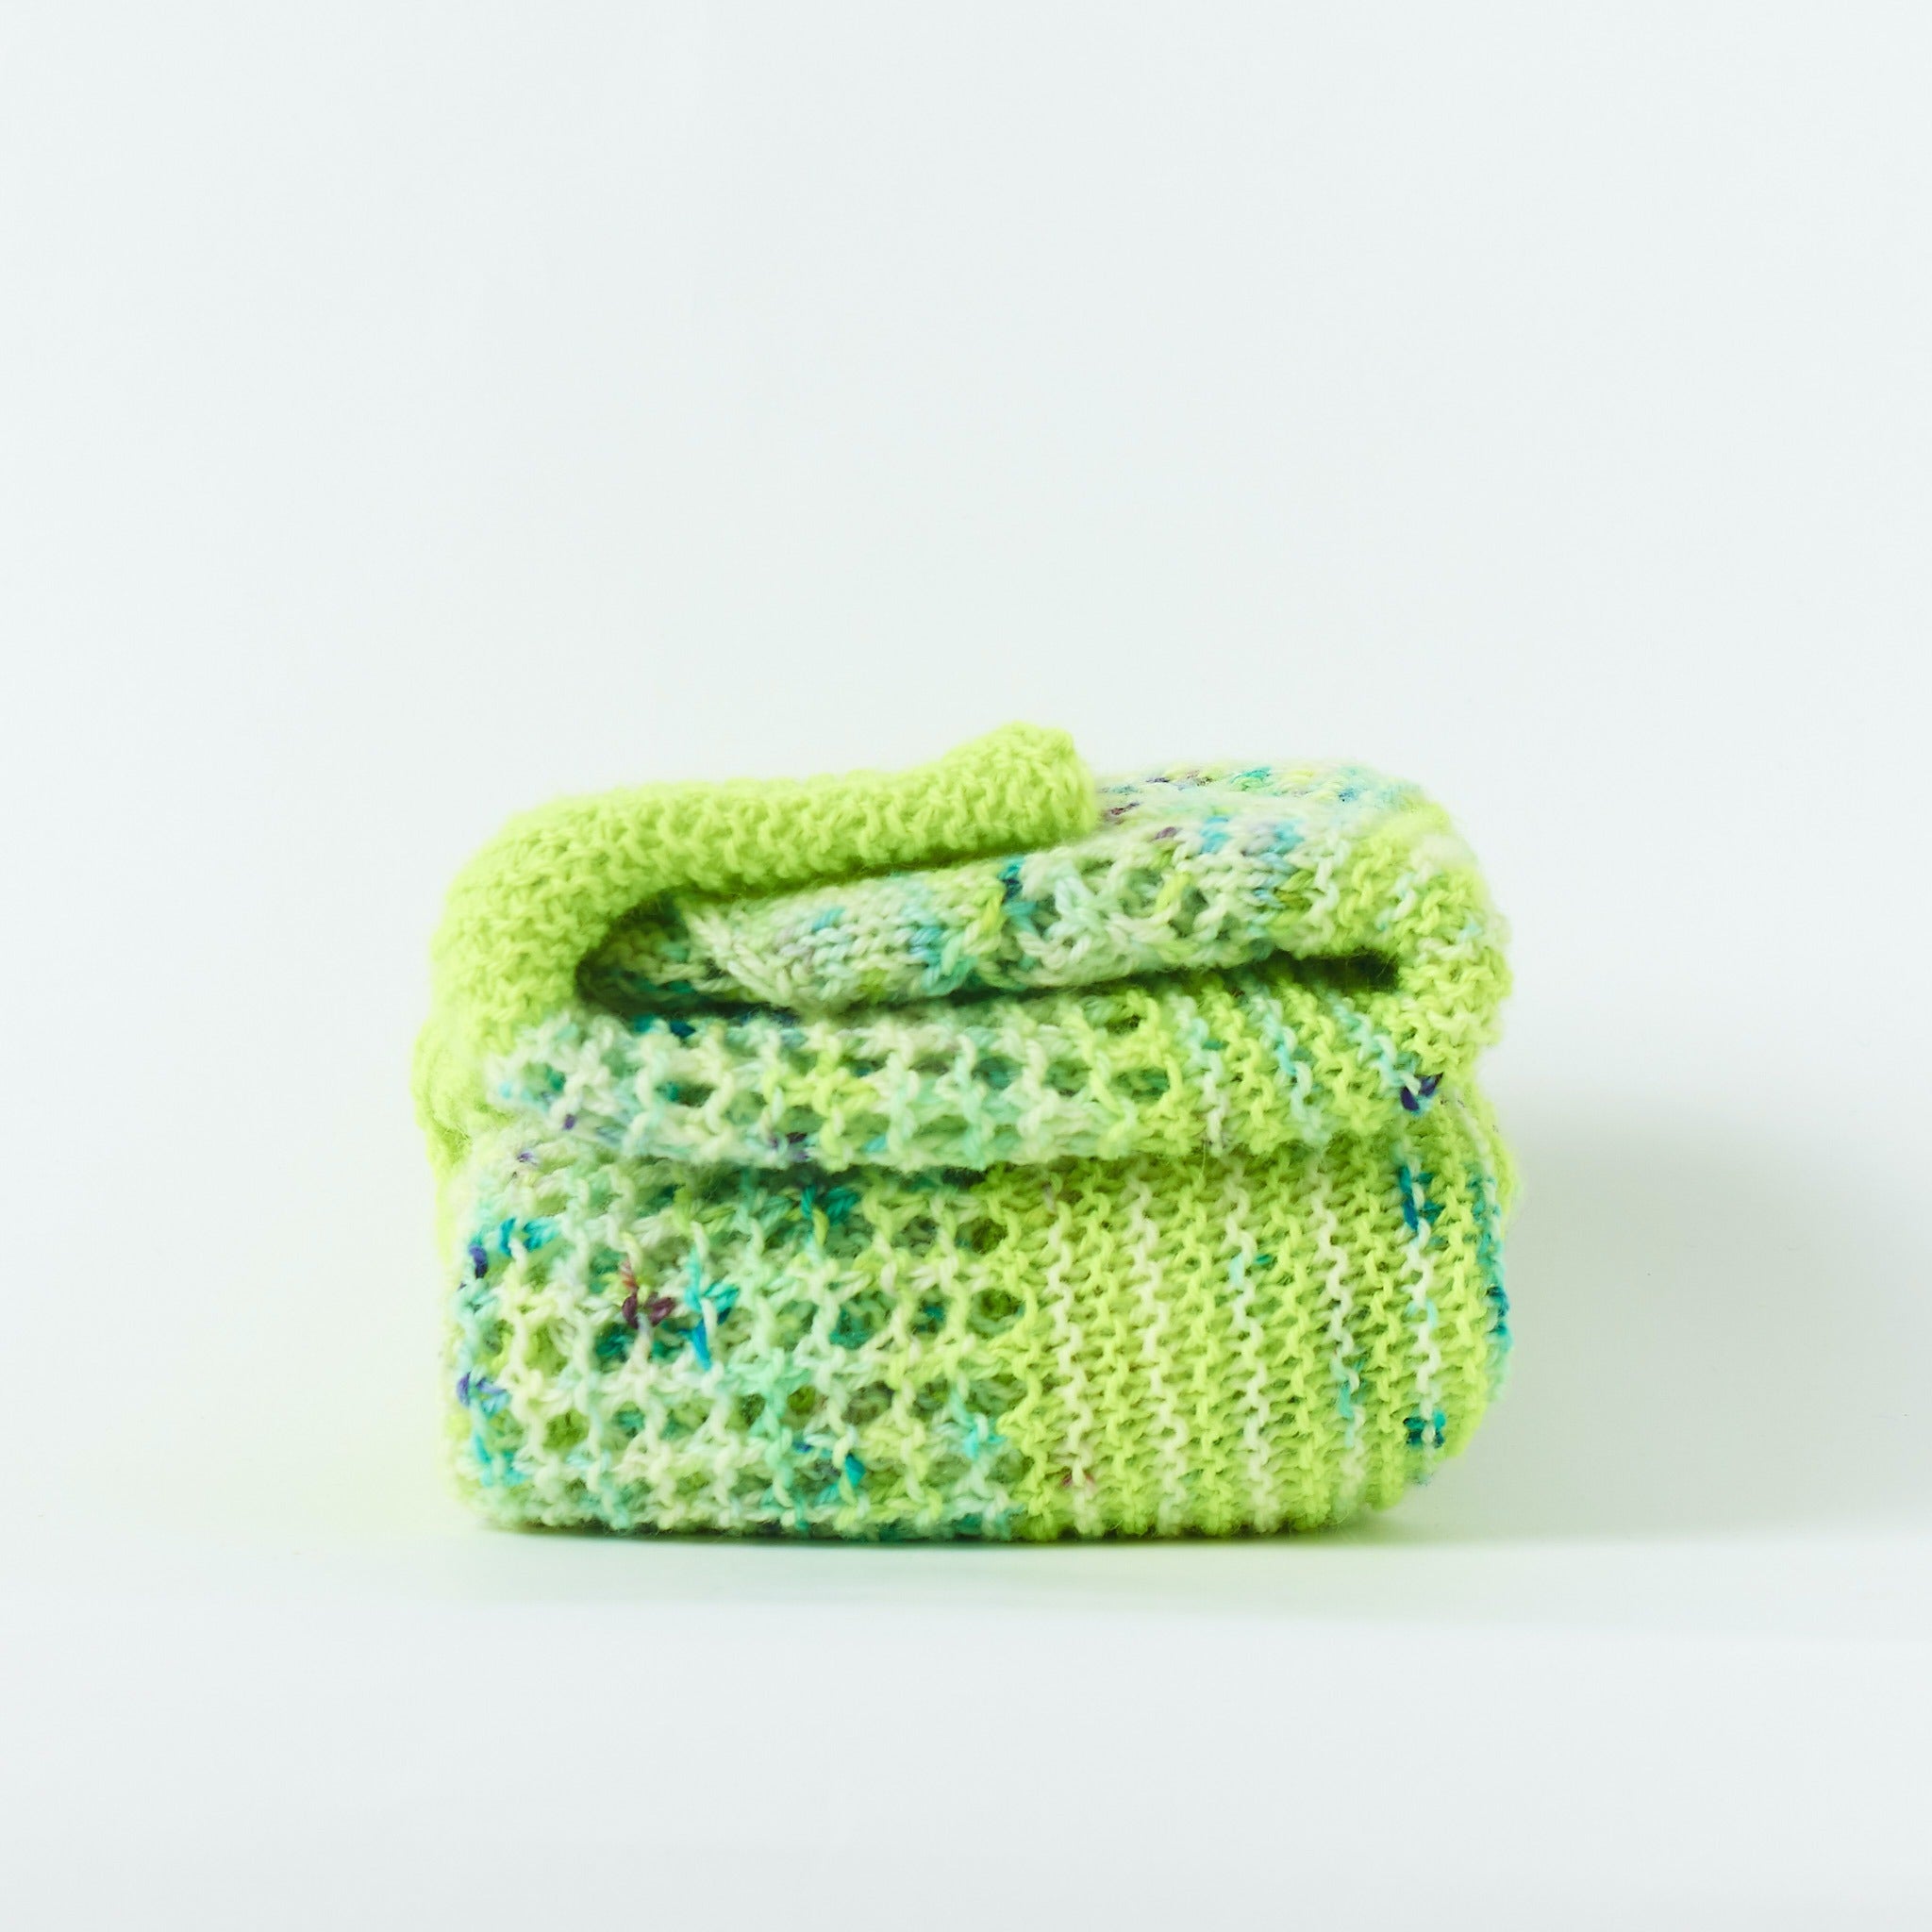 Handknit shawl folded neatly in a square knit out of neon lime and blue speckled yarn